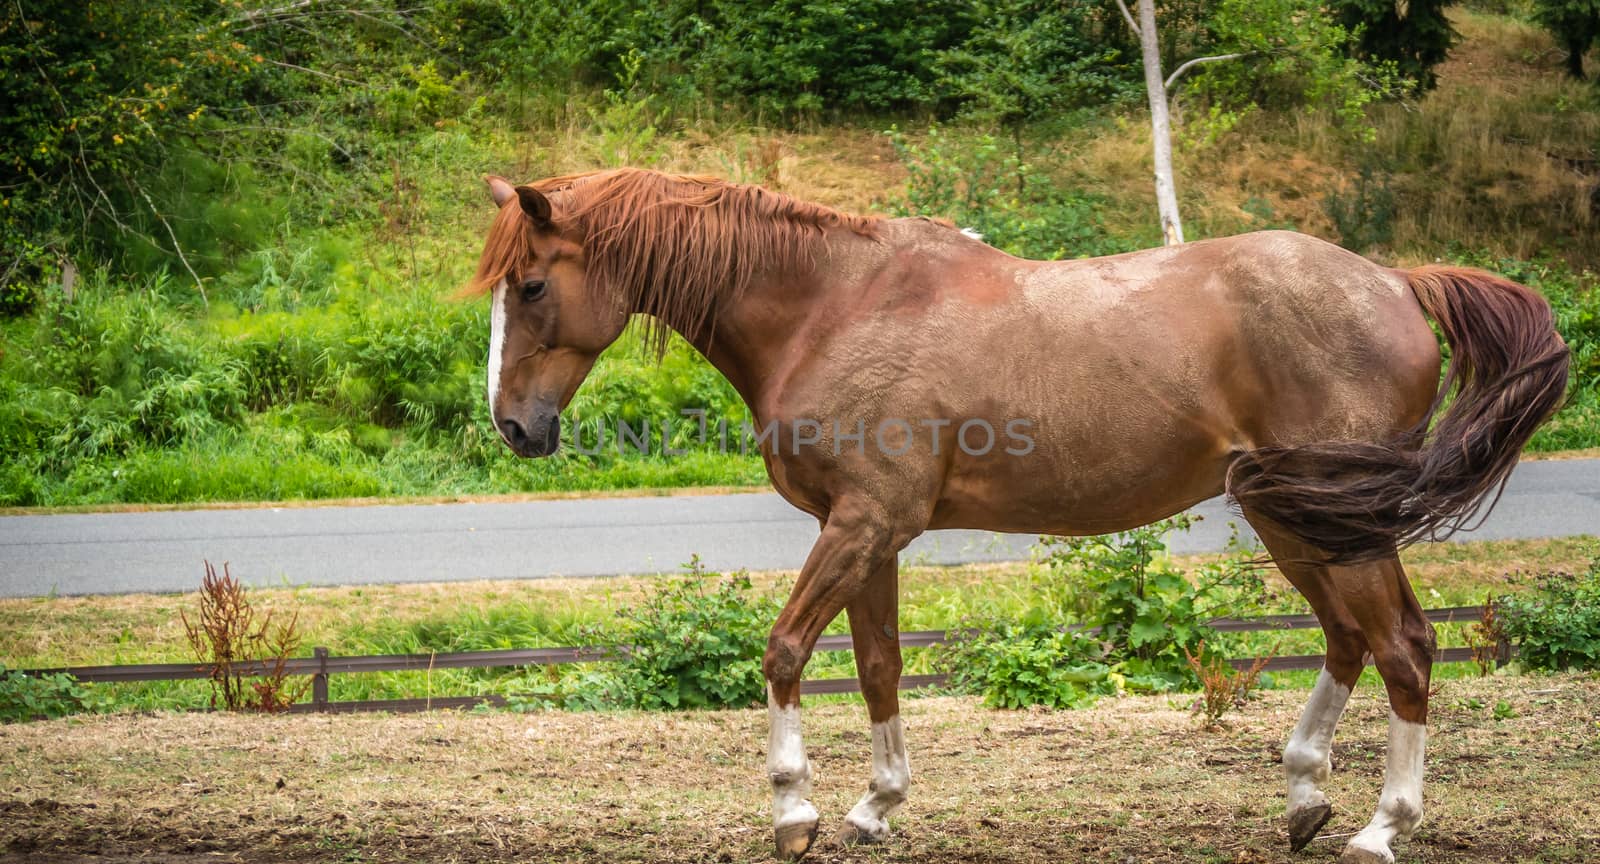 A bay horse walks around in his outdoor corral